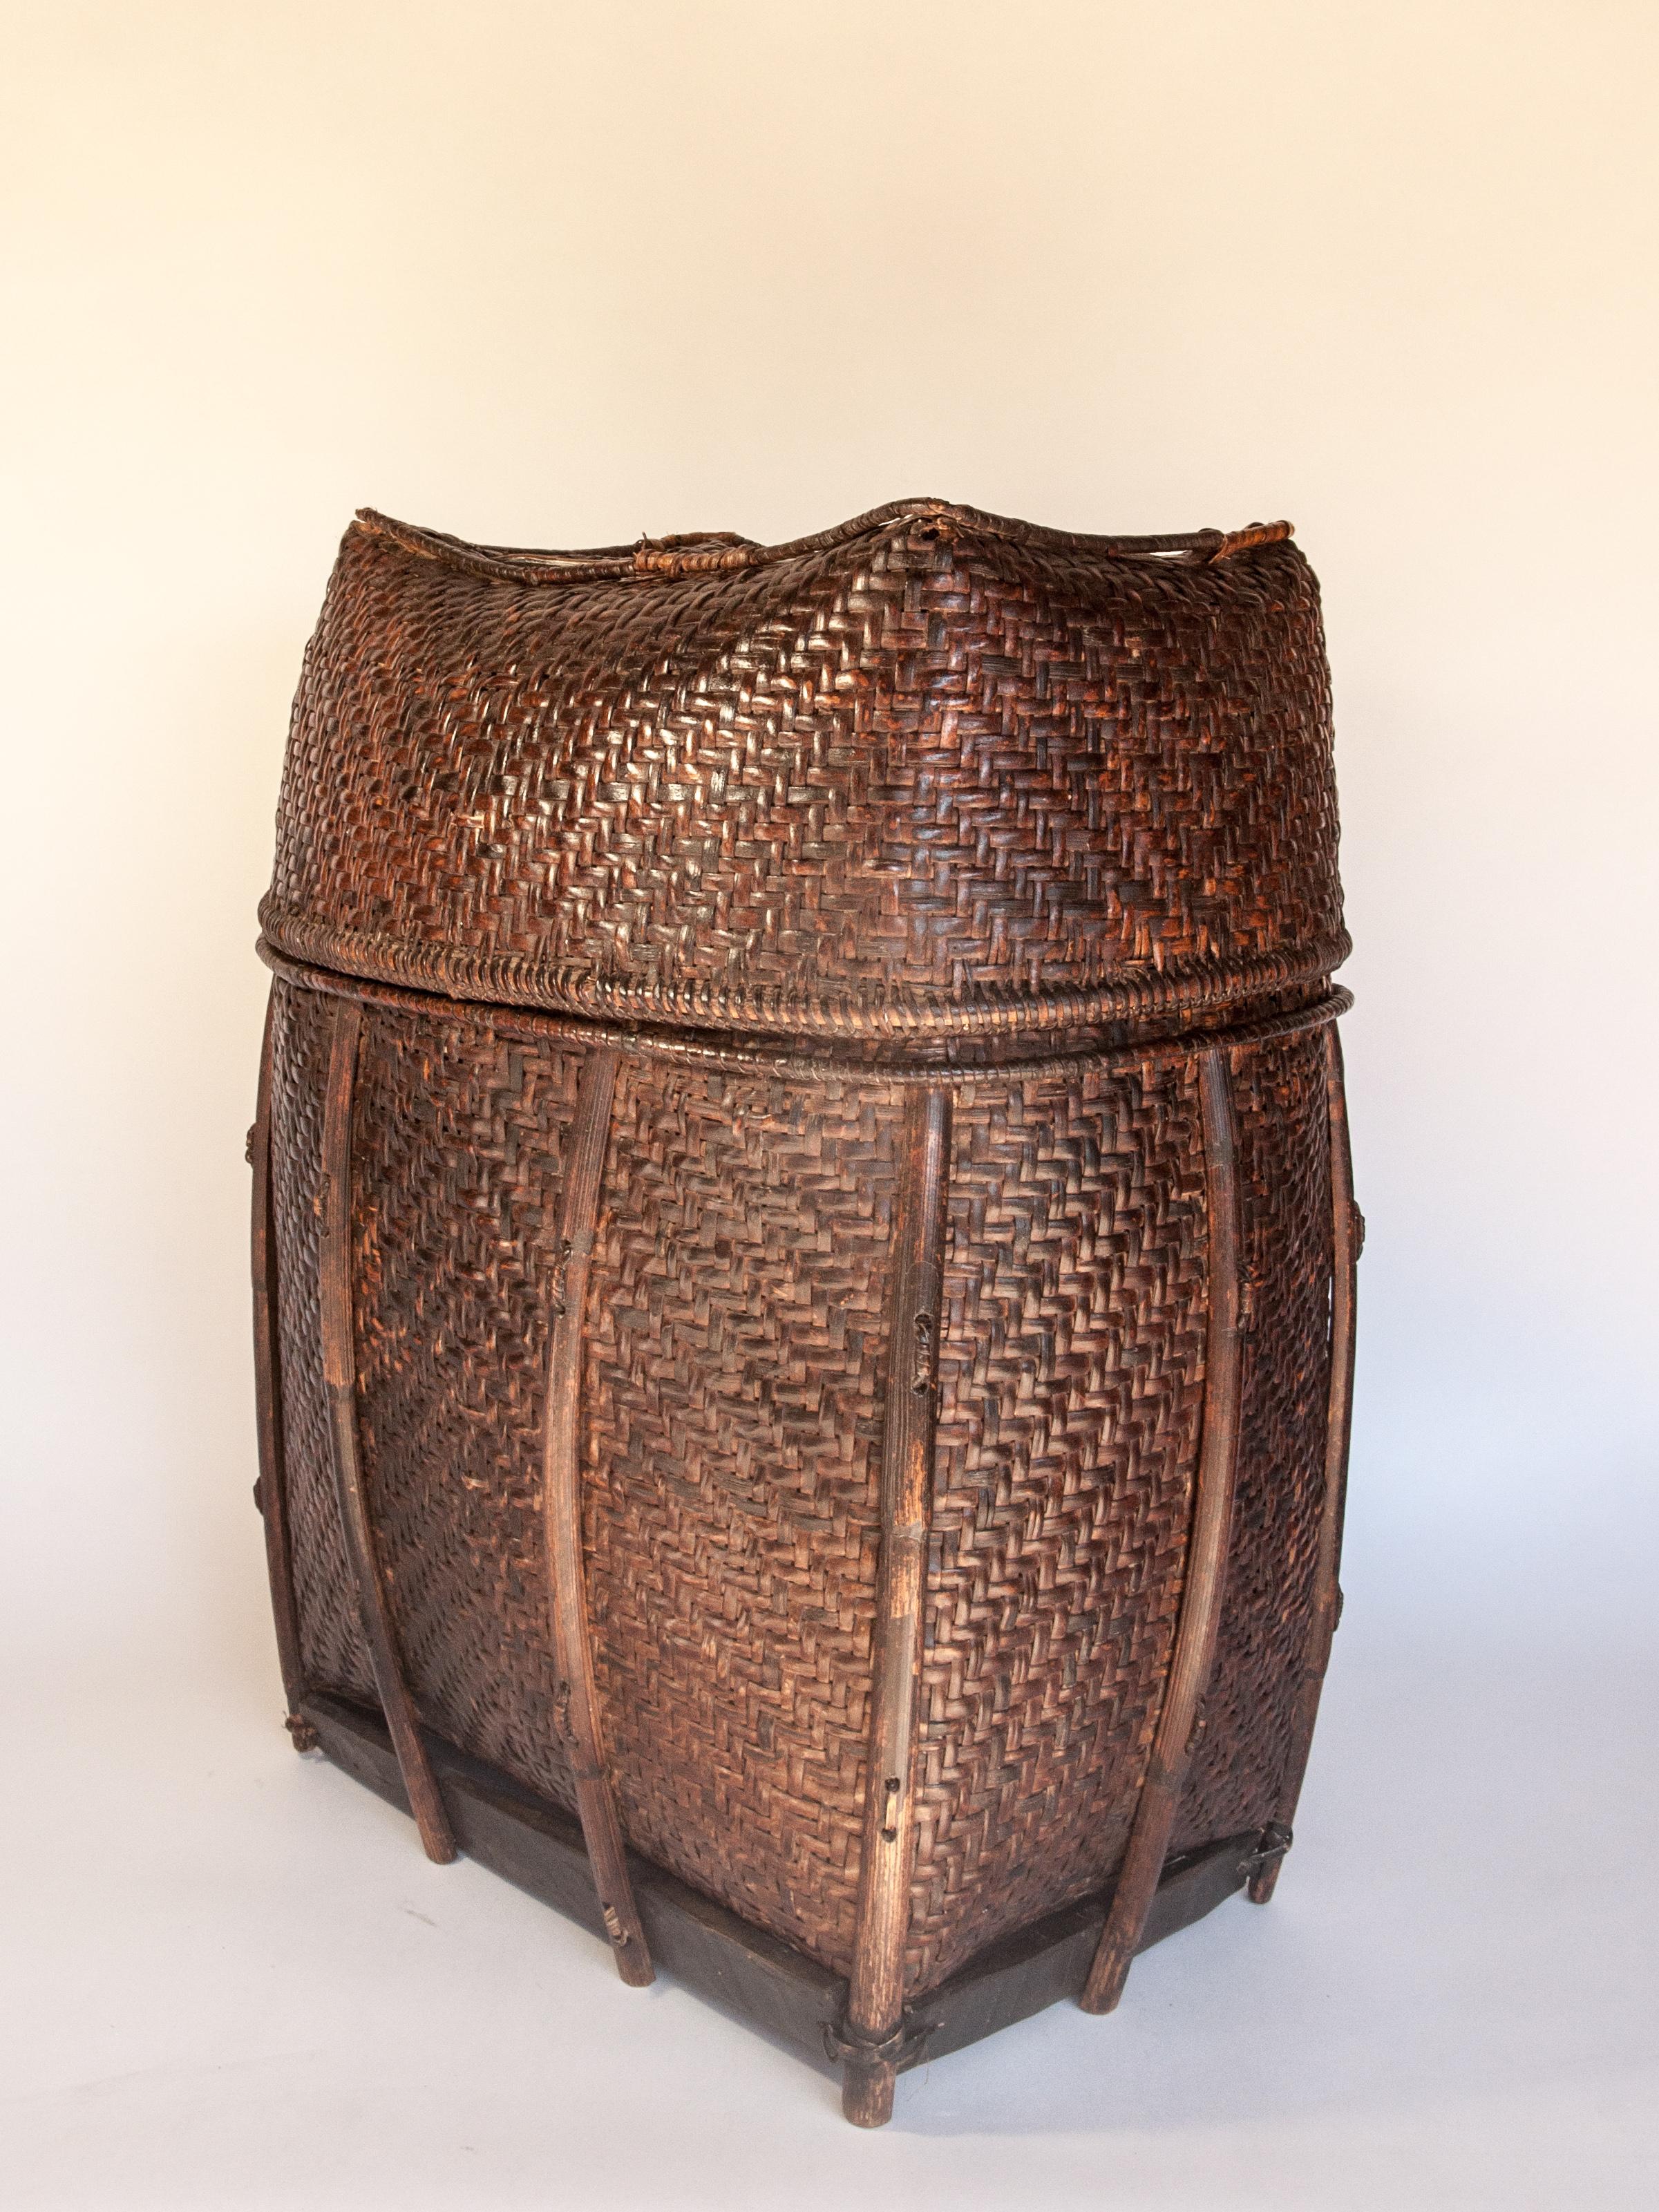 Tribal Vintage Bamboo Storage Basket from the Akha of North Thailand, Mid-20th Century